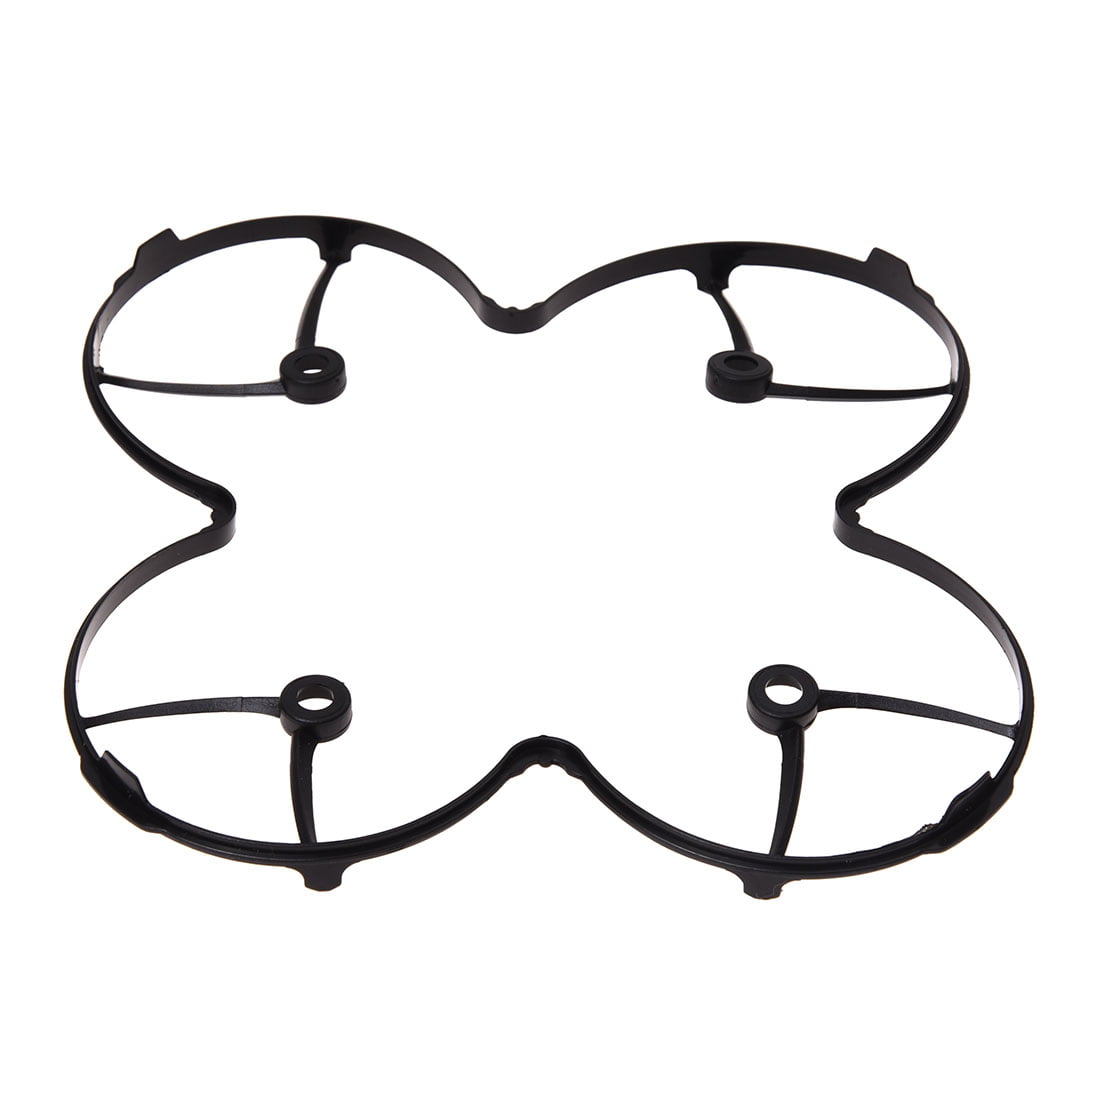 Hubsan X4 Parts Protection Cover FOR H107C H107D RC Quadcopter Tide 